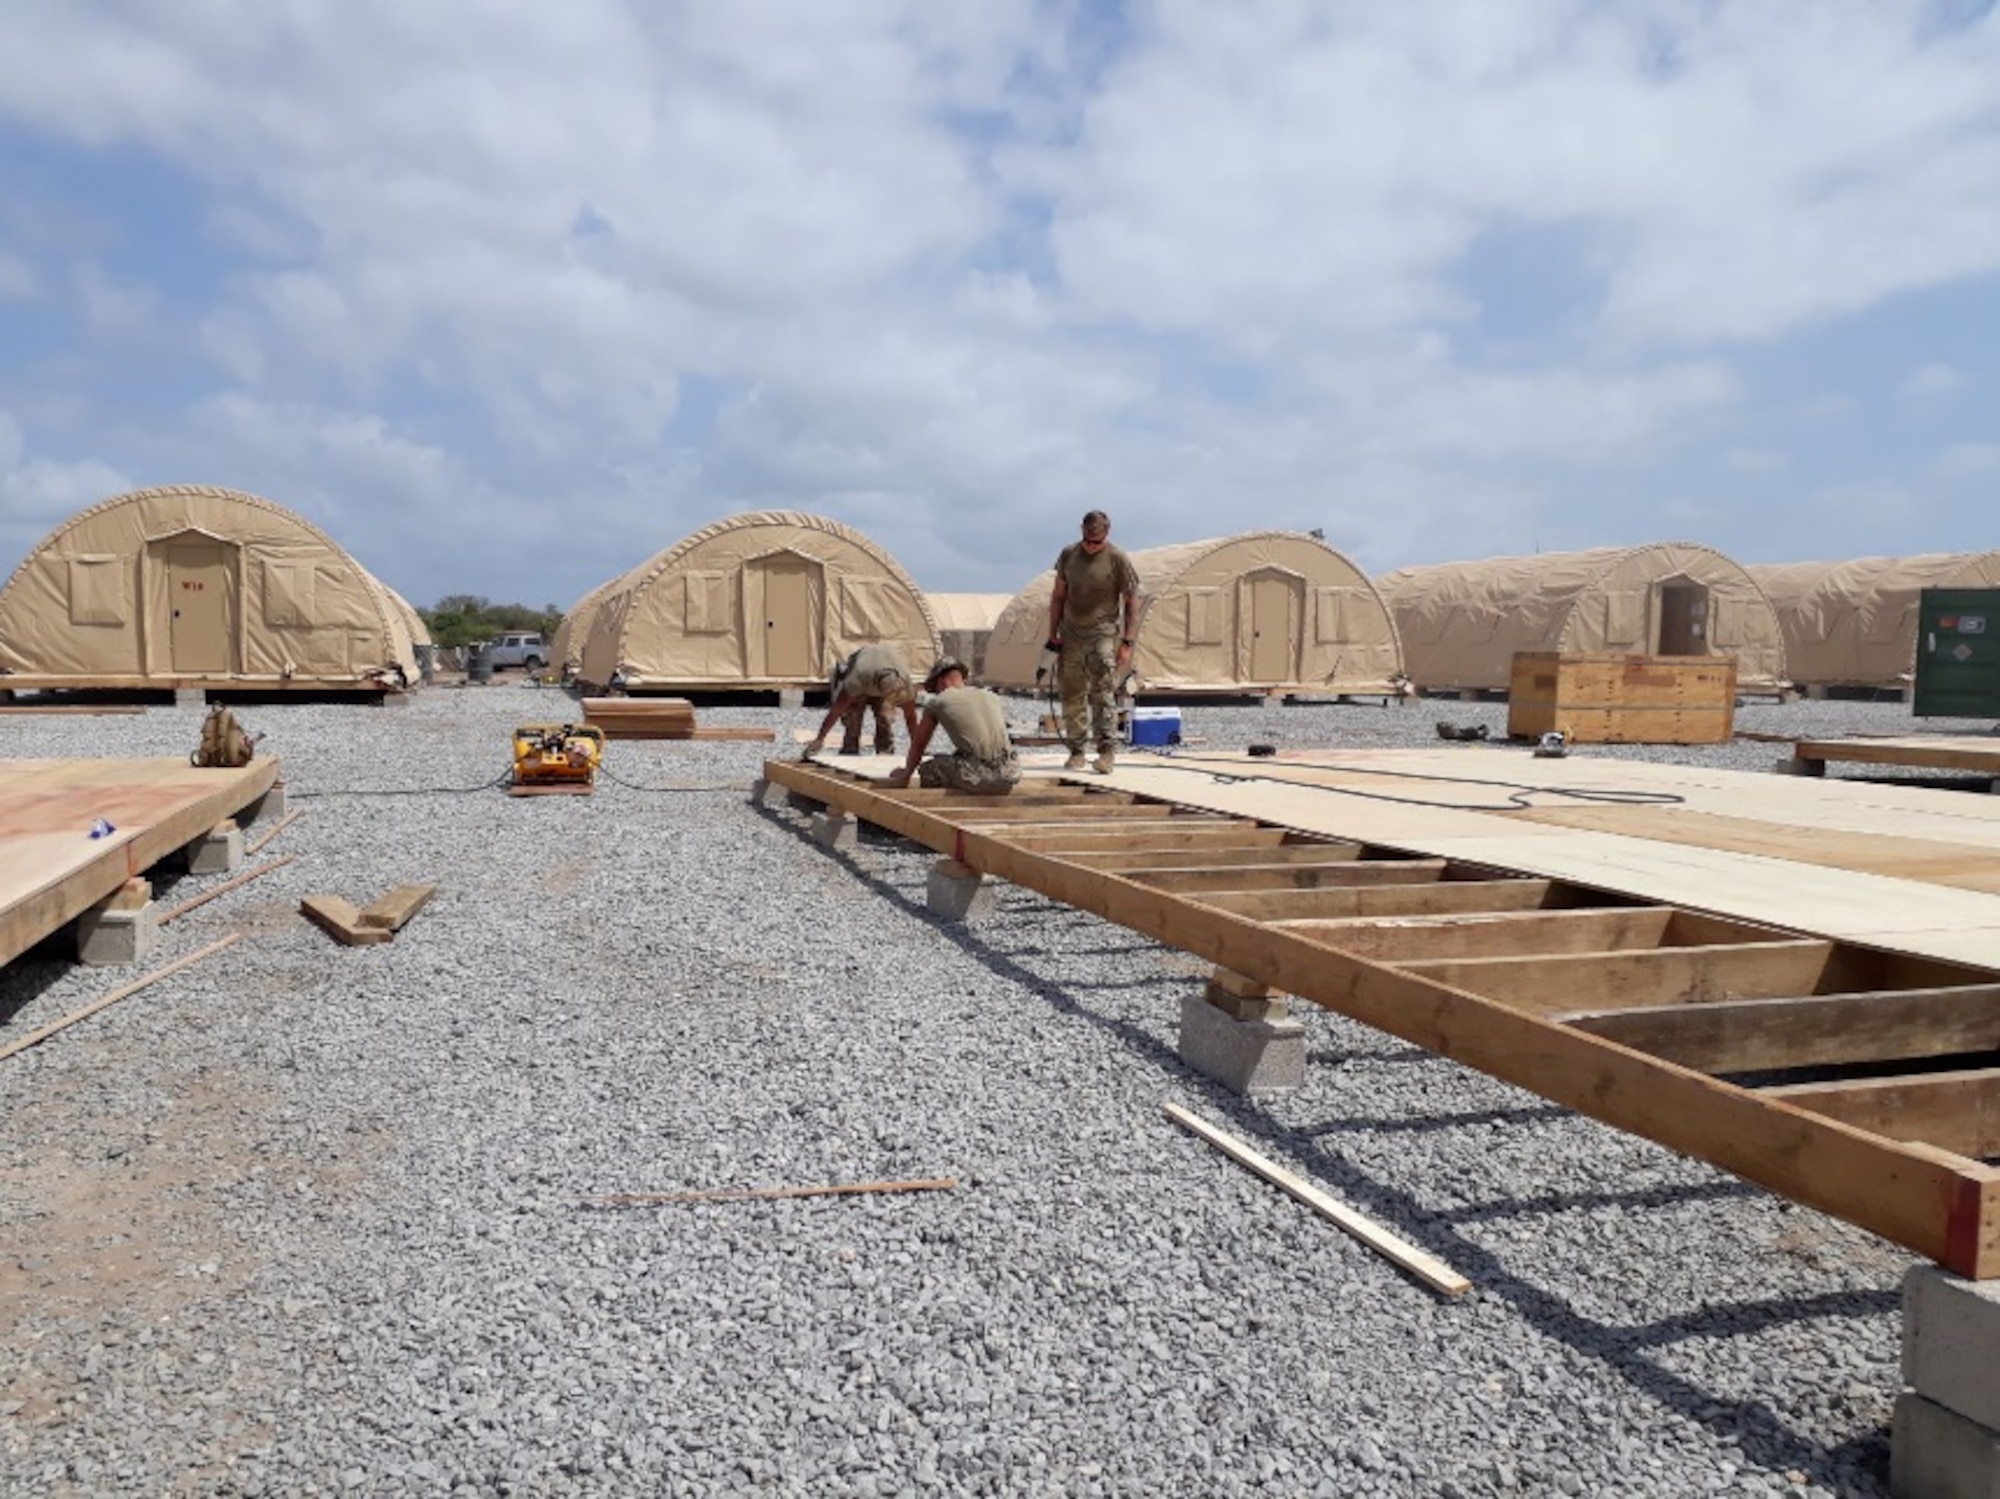 Airmen from the 435th Air Ground Operations Wing and 435th Air Expeditionary Wing execute a short-notice tasker to build-out a base capability in East Africa, Dec. 29, 2020. In addition to the build-out the Airmen repurposed three sleeping buildings into office spaces, expanded kitchen operations by 1,000 square feet, and constructed new fire department berthing tents and an alarm room.